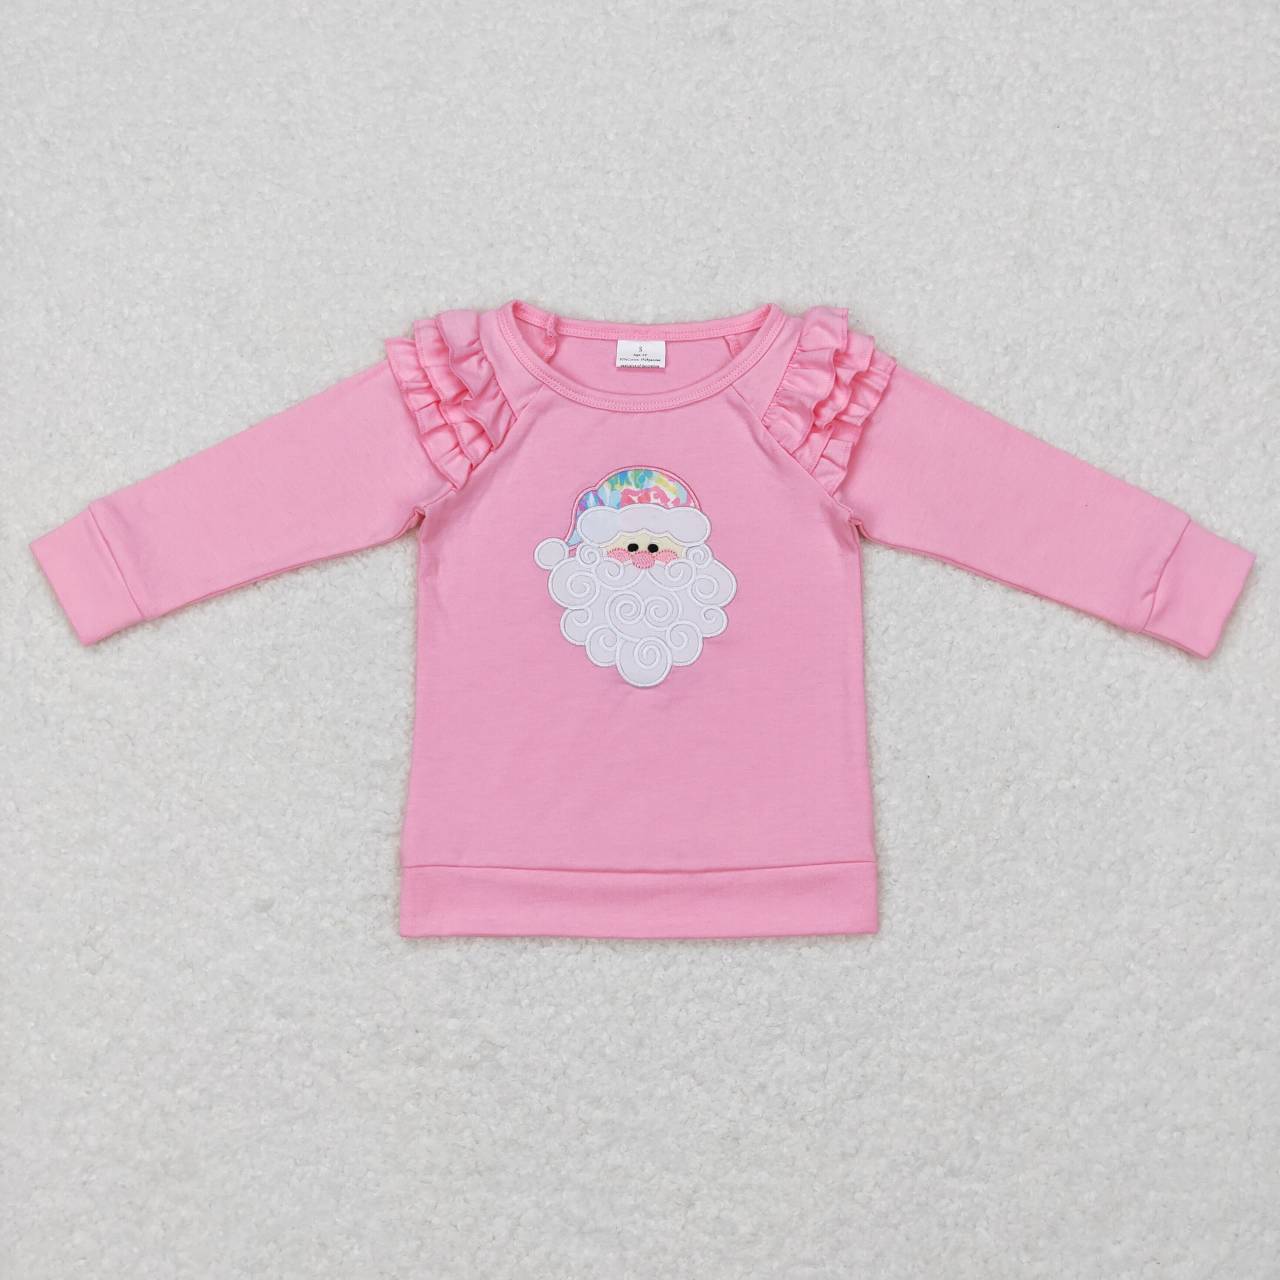 GT0369 Santa Claus embroidered colorful pattern pink lace long-sleeved top